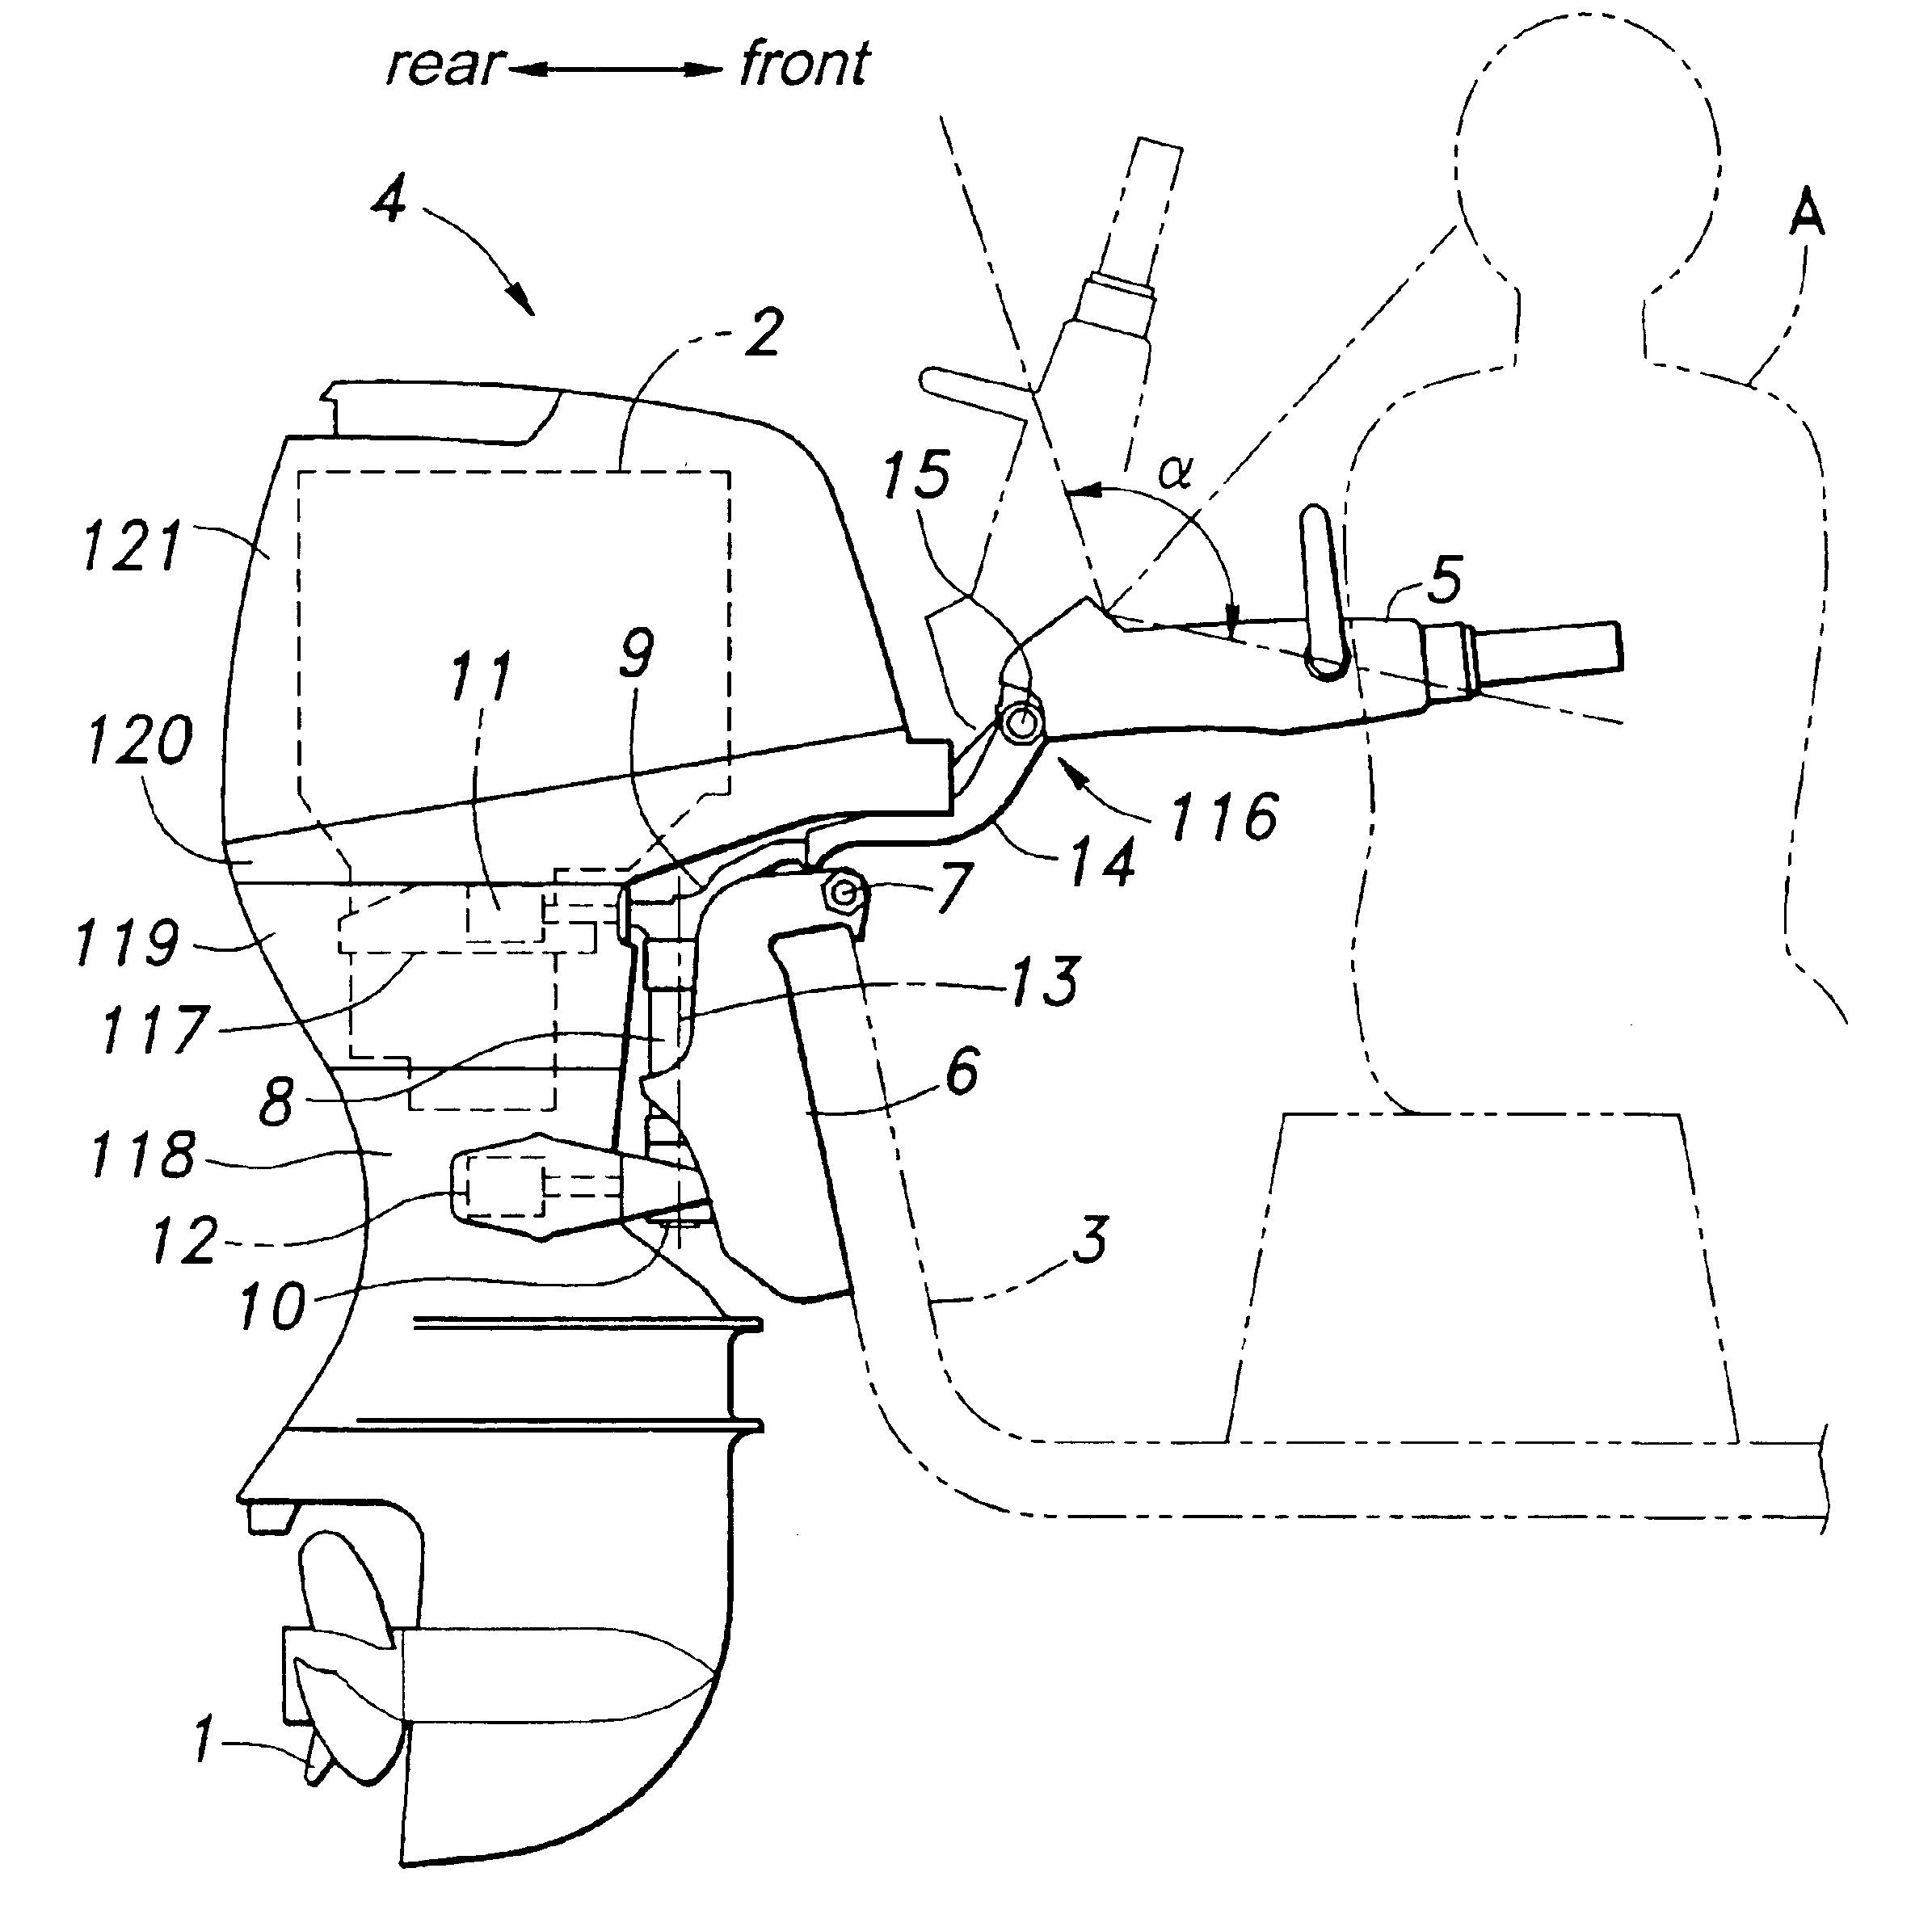 Outboard motor and tiller handle thereof